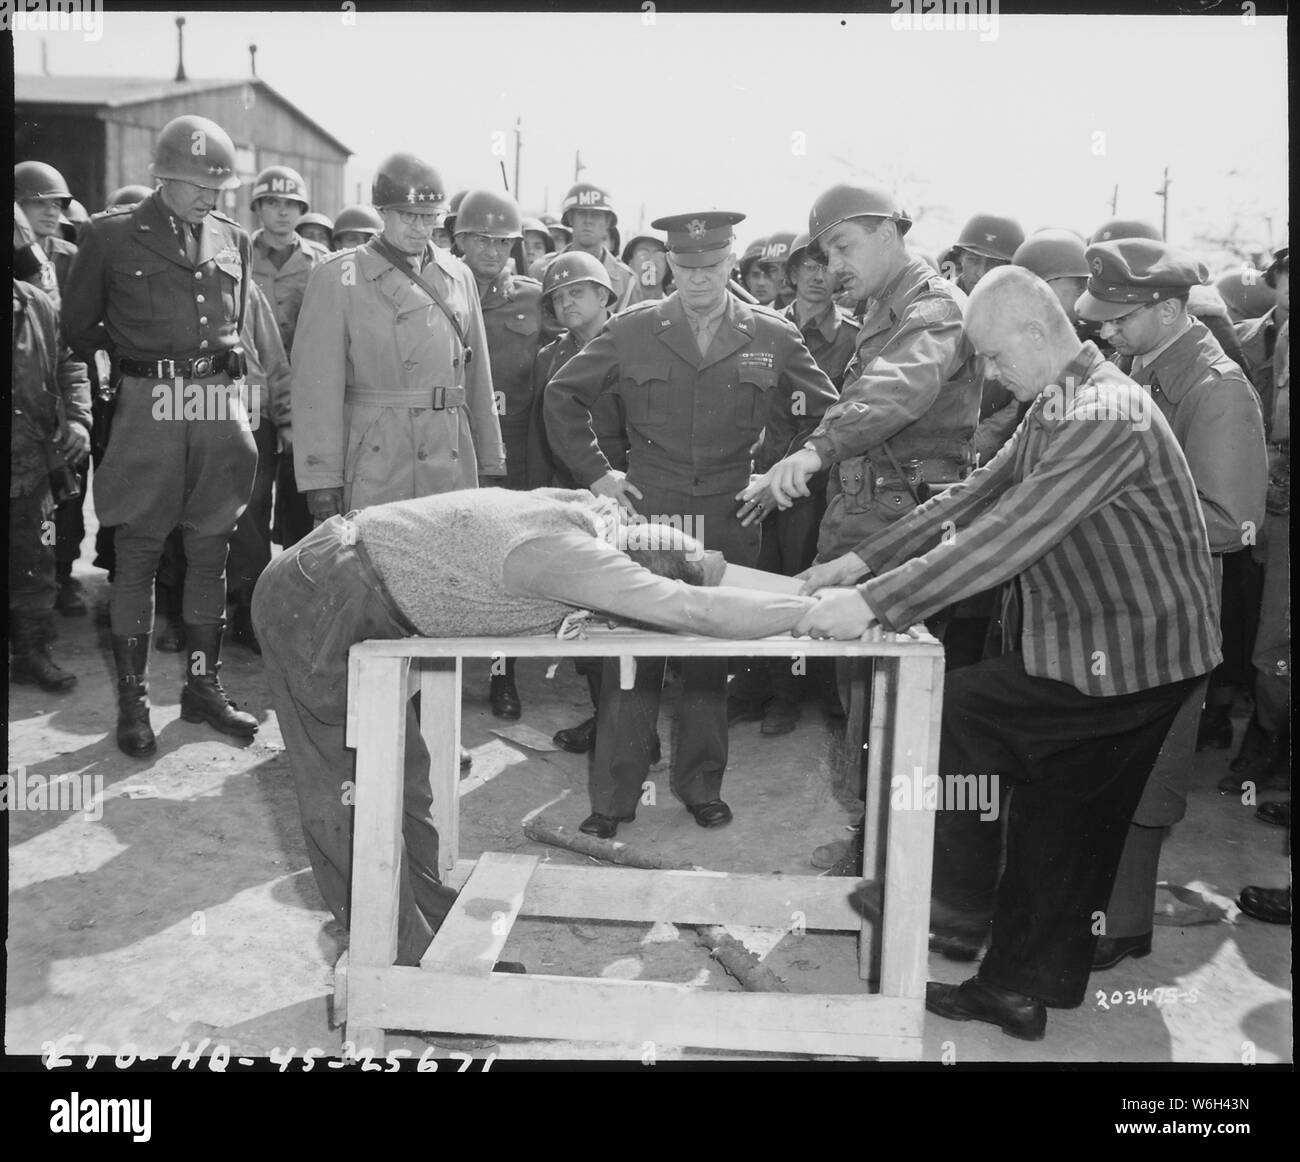 General Dwight D. Eisenhower watches grimly while occupants of a German concentration camp at Gotha demonstrate how they were tortured by the Nazi sadists operating the camp. Generals Bradley and Patton are at his right. Germany; Scope and content:  On pages 275 and 276 of General Patton's book, War As I Knew It, Patton describes the events leading up to and including the one depicted in this photo.  He states that he, Eisenhower and Bradley learned later, that the person in the striped shirt, demonstrating the torture, was actually one of the camp's executioners.  Patton notes that this man w Stock Photo